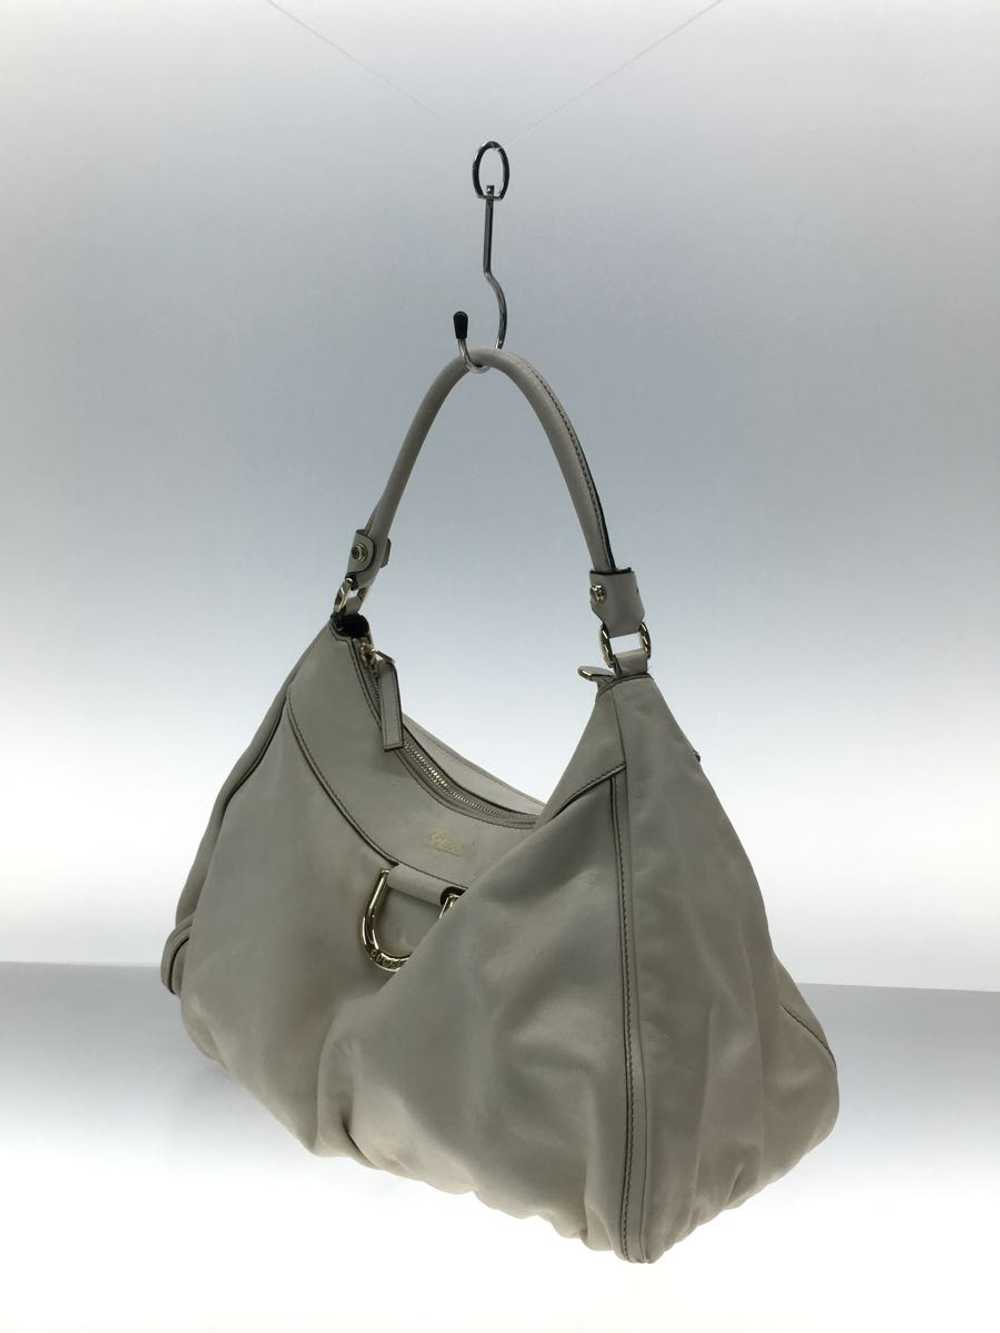 Used Gucci Shoulder Bag Abby Leather White/Leather - image 2